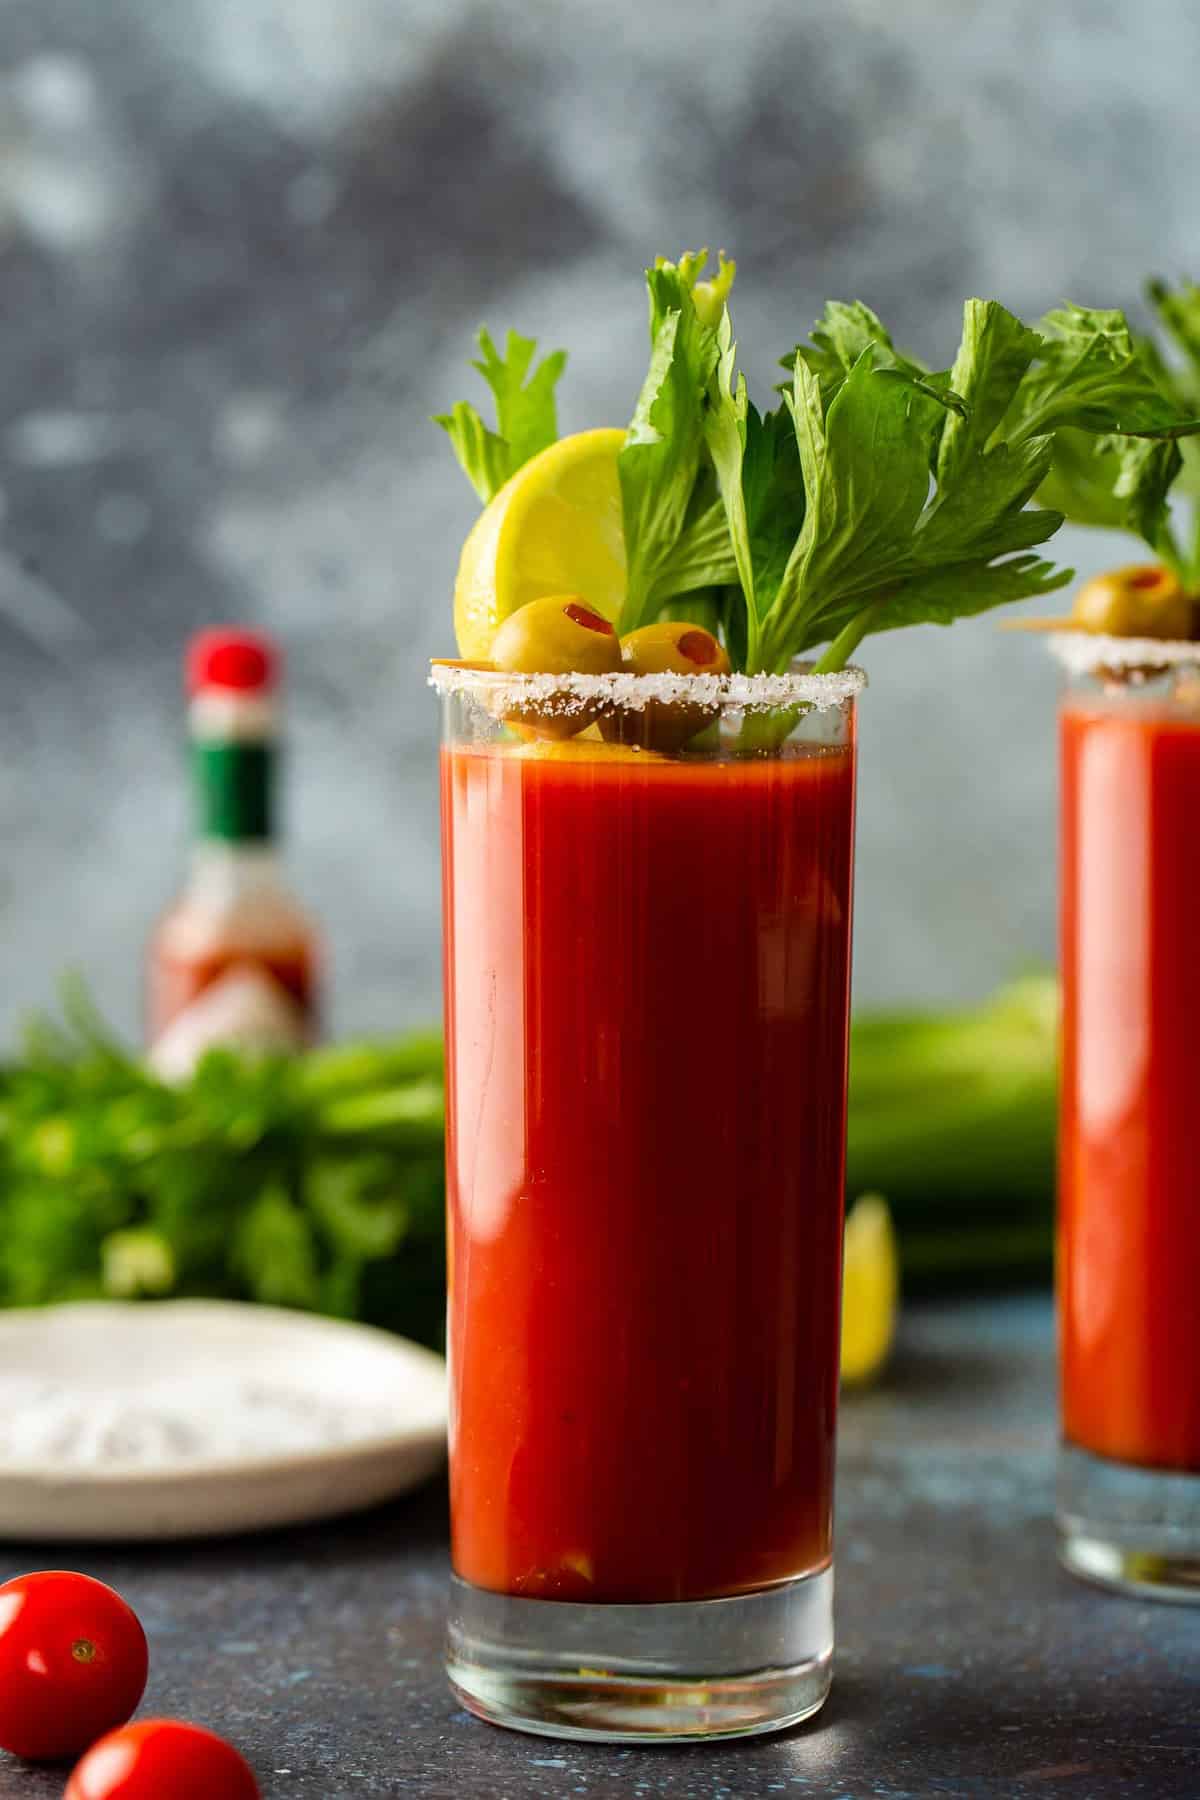 https://www.thecookierookie.com/wp-content/uploads/2014/02/Stovetop-Bloody-Mary-3.jpg